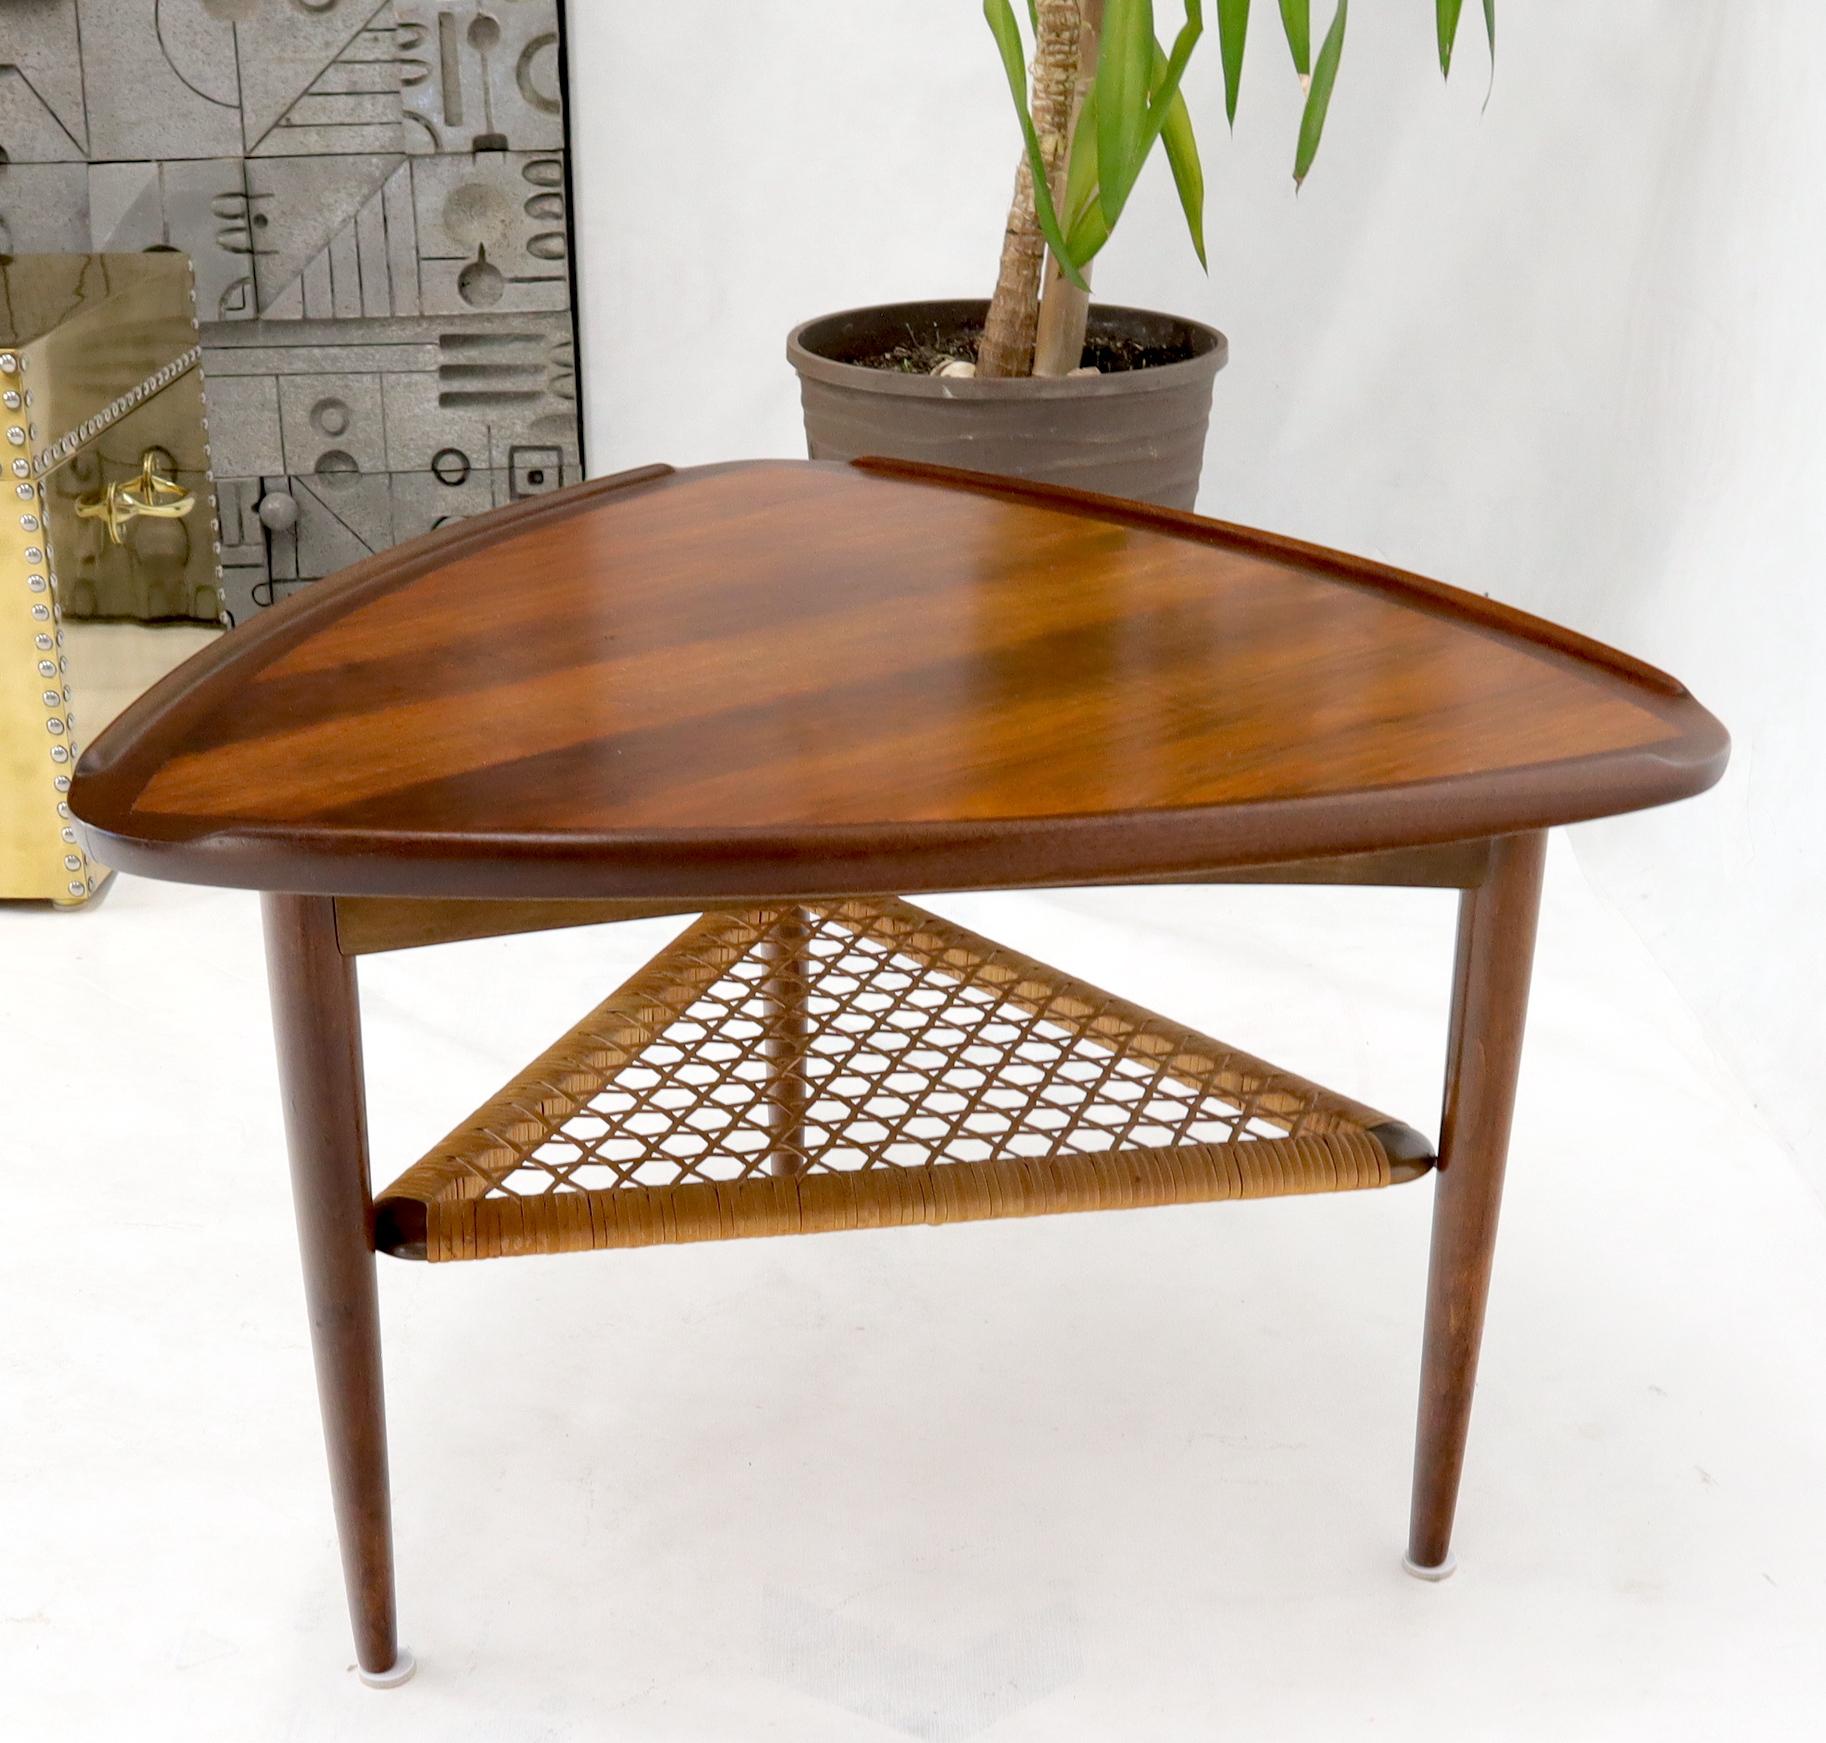 triangular shaped side tables